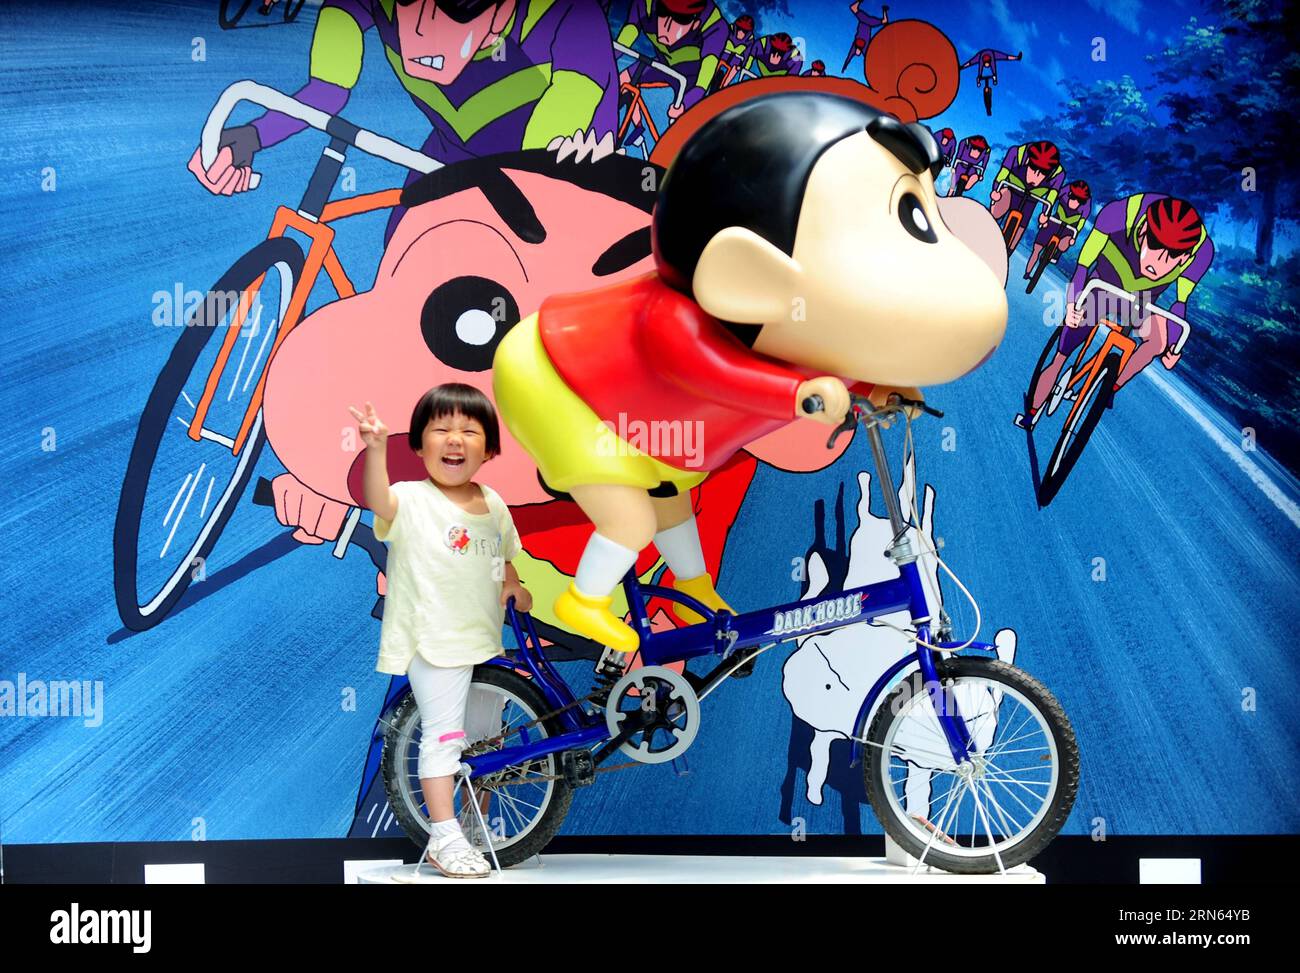 (150711) -- SHENYANG, July 11, 2015 -- A girl plays at an exhibition marking the 25th anniversary of Japanese manga series Crayon Shin-chan in Shenyang, northeast China s Liaoning Province July 11, 2015. Dozens of manga and theatrical version of Crayon Shin-chan and related figures were displayed on the exhibition that opened to public on Saturday. (mcg) CHINA-SHENYANG-CRAYON SHIN-CHAN-25TH ANNIVERSARY(CN) ZhangxWenkui PUBLICATIONxNOTxINxCHN   150 711 Shenyang July 11 2015 a Girl PLAYS AT to Exhibition marking The 25th Anniversary of Japanese Manga Series crayon Shin Chan in Shenyang Northeast Stock Photo